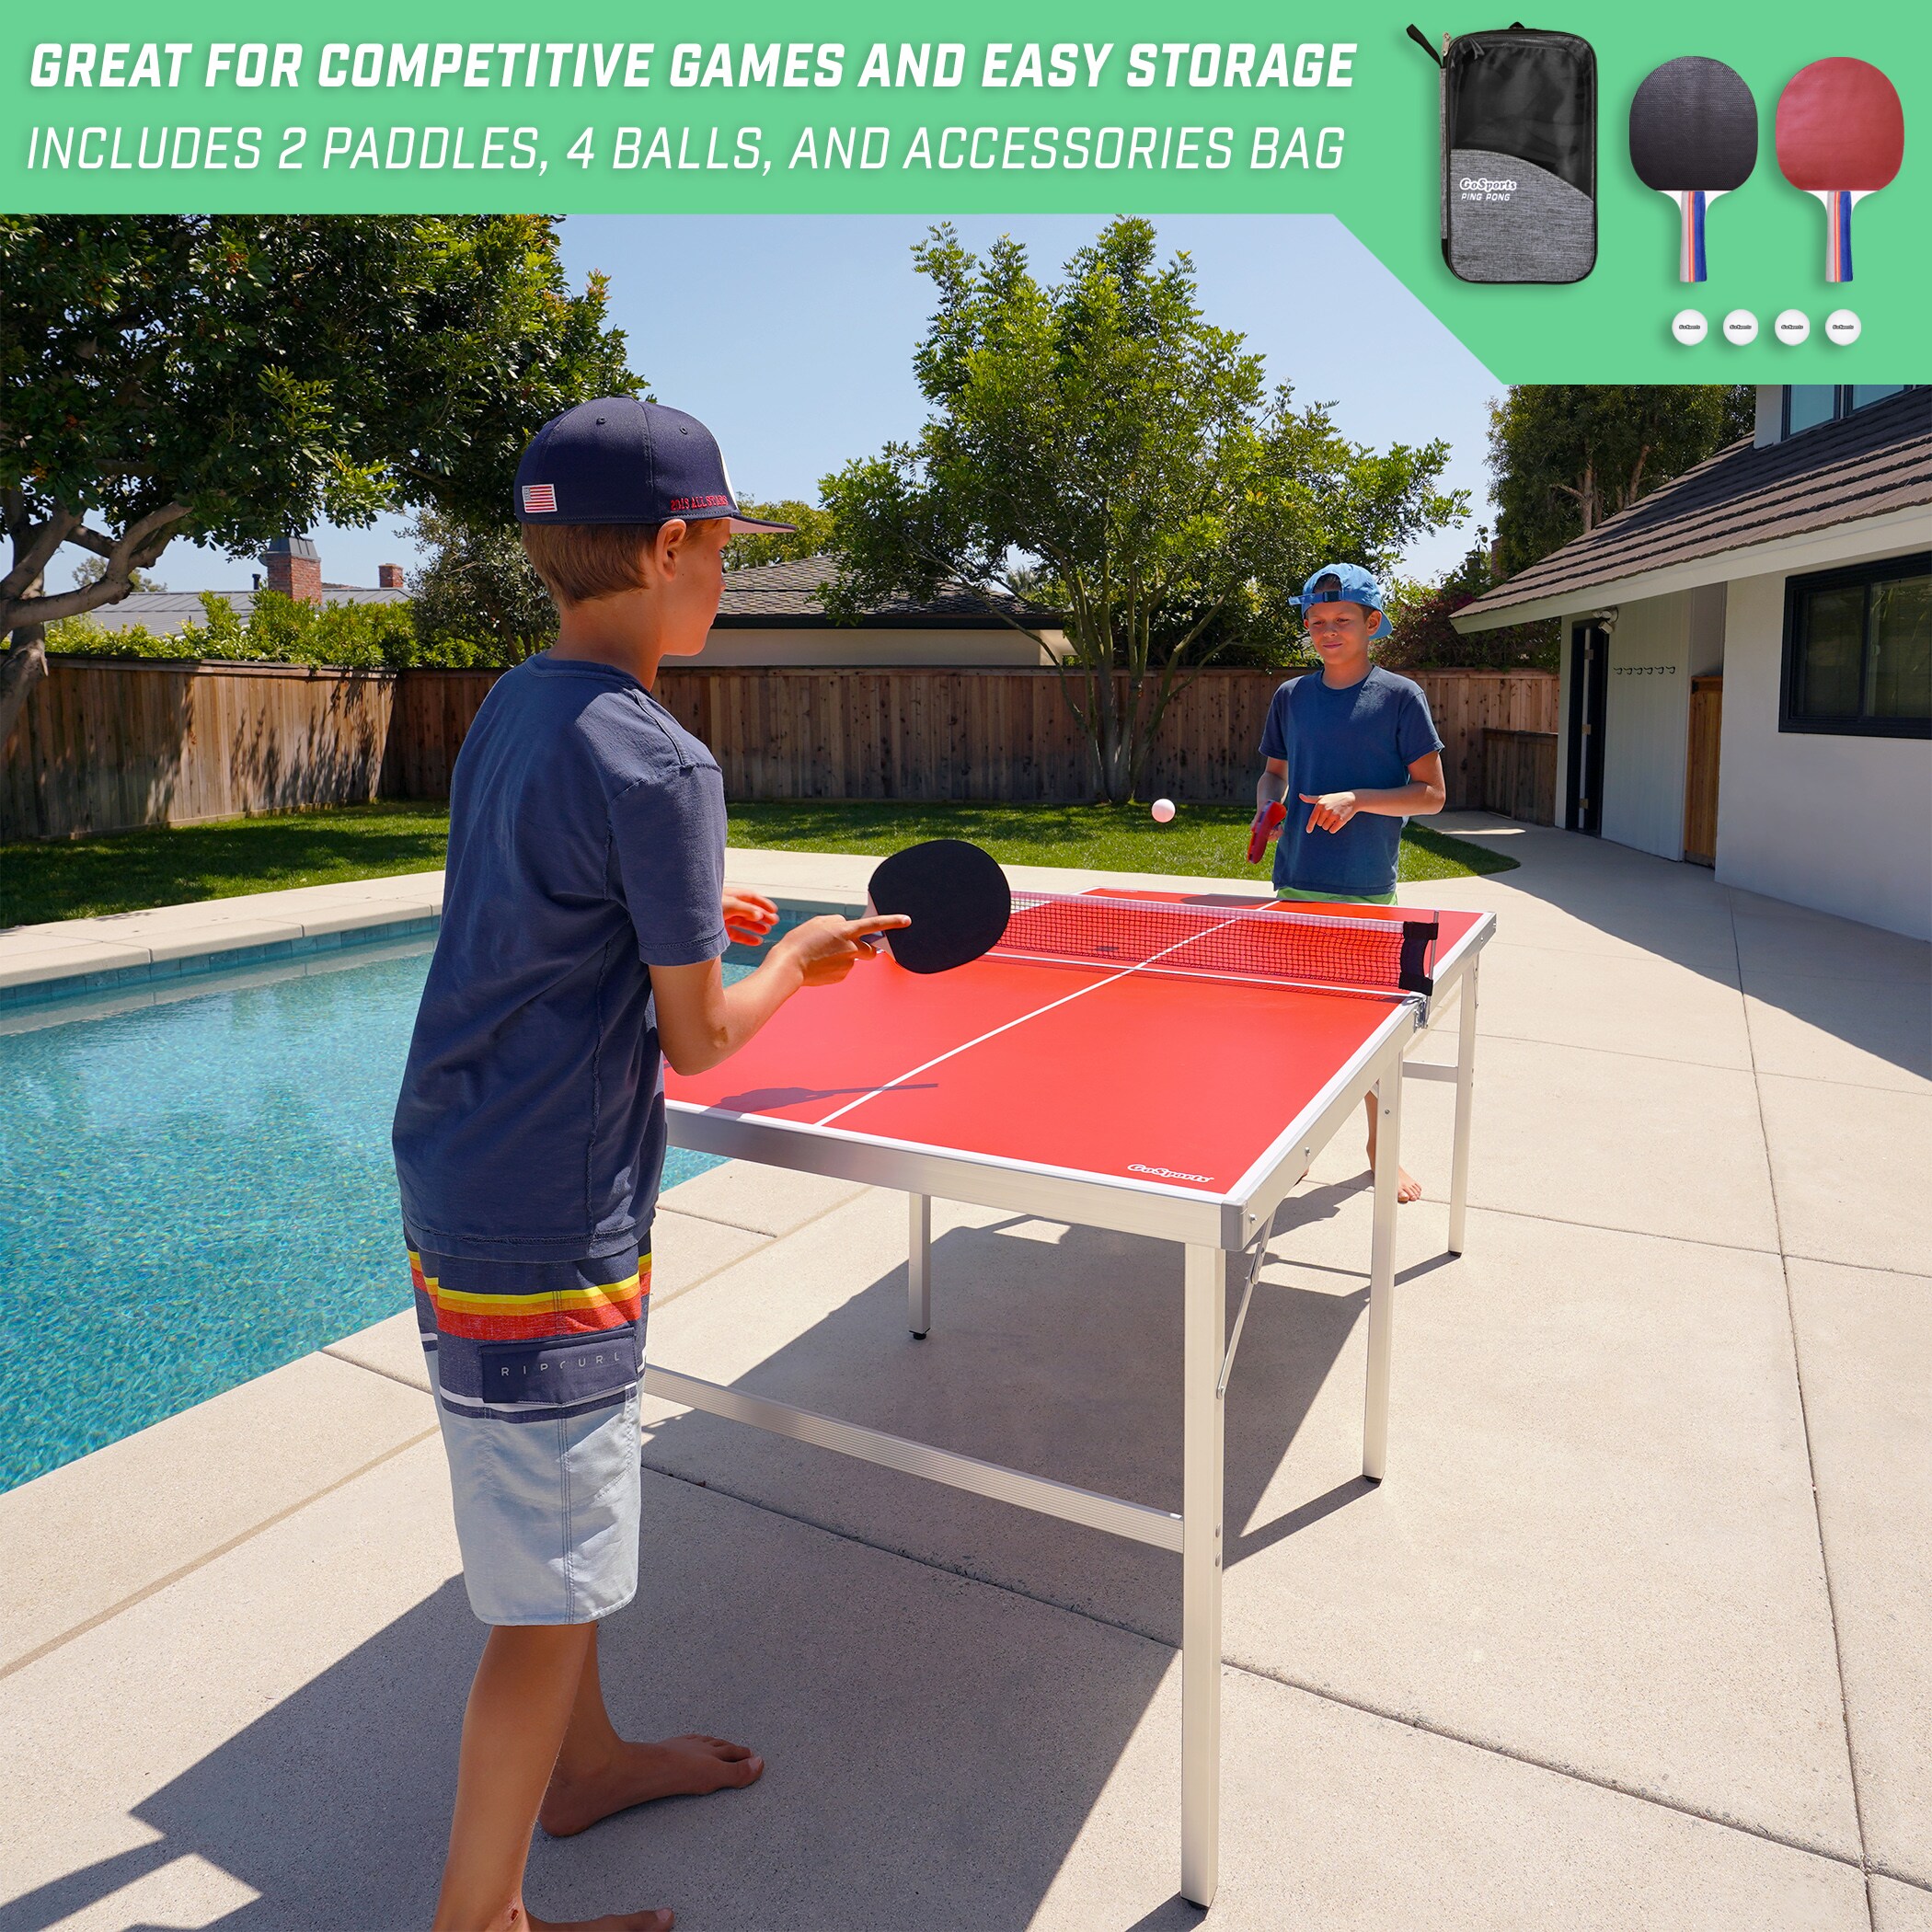 GoSports 6' x 3' Tennis Table Set for sale online 